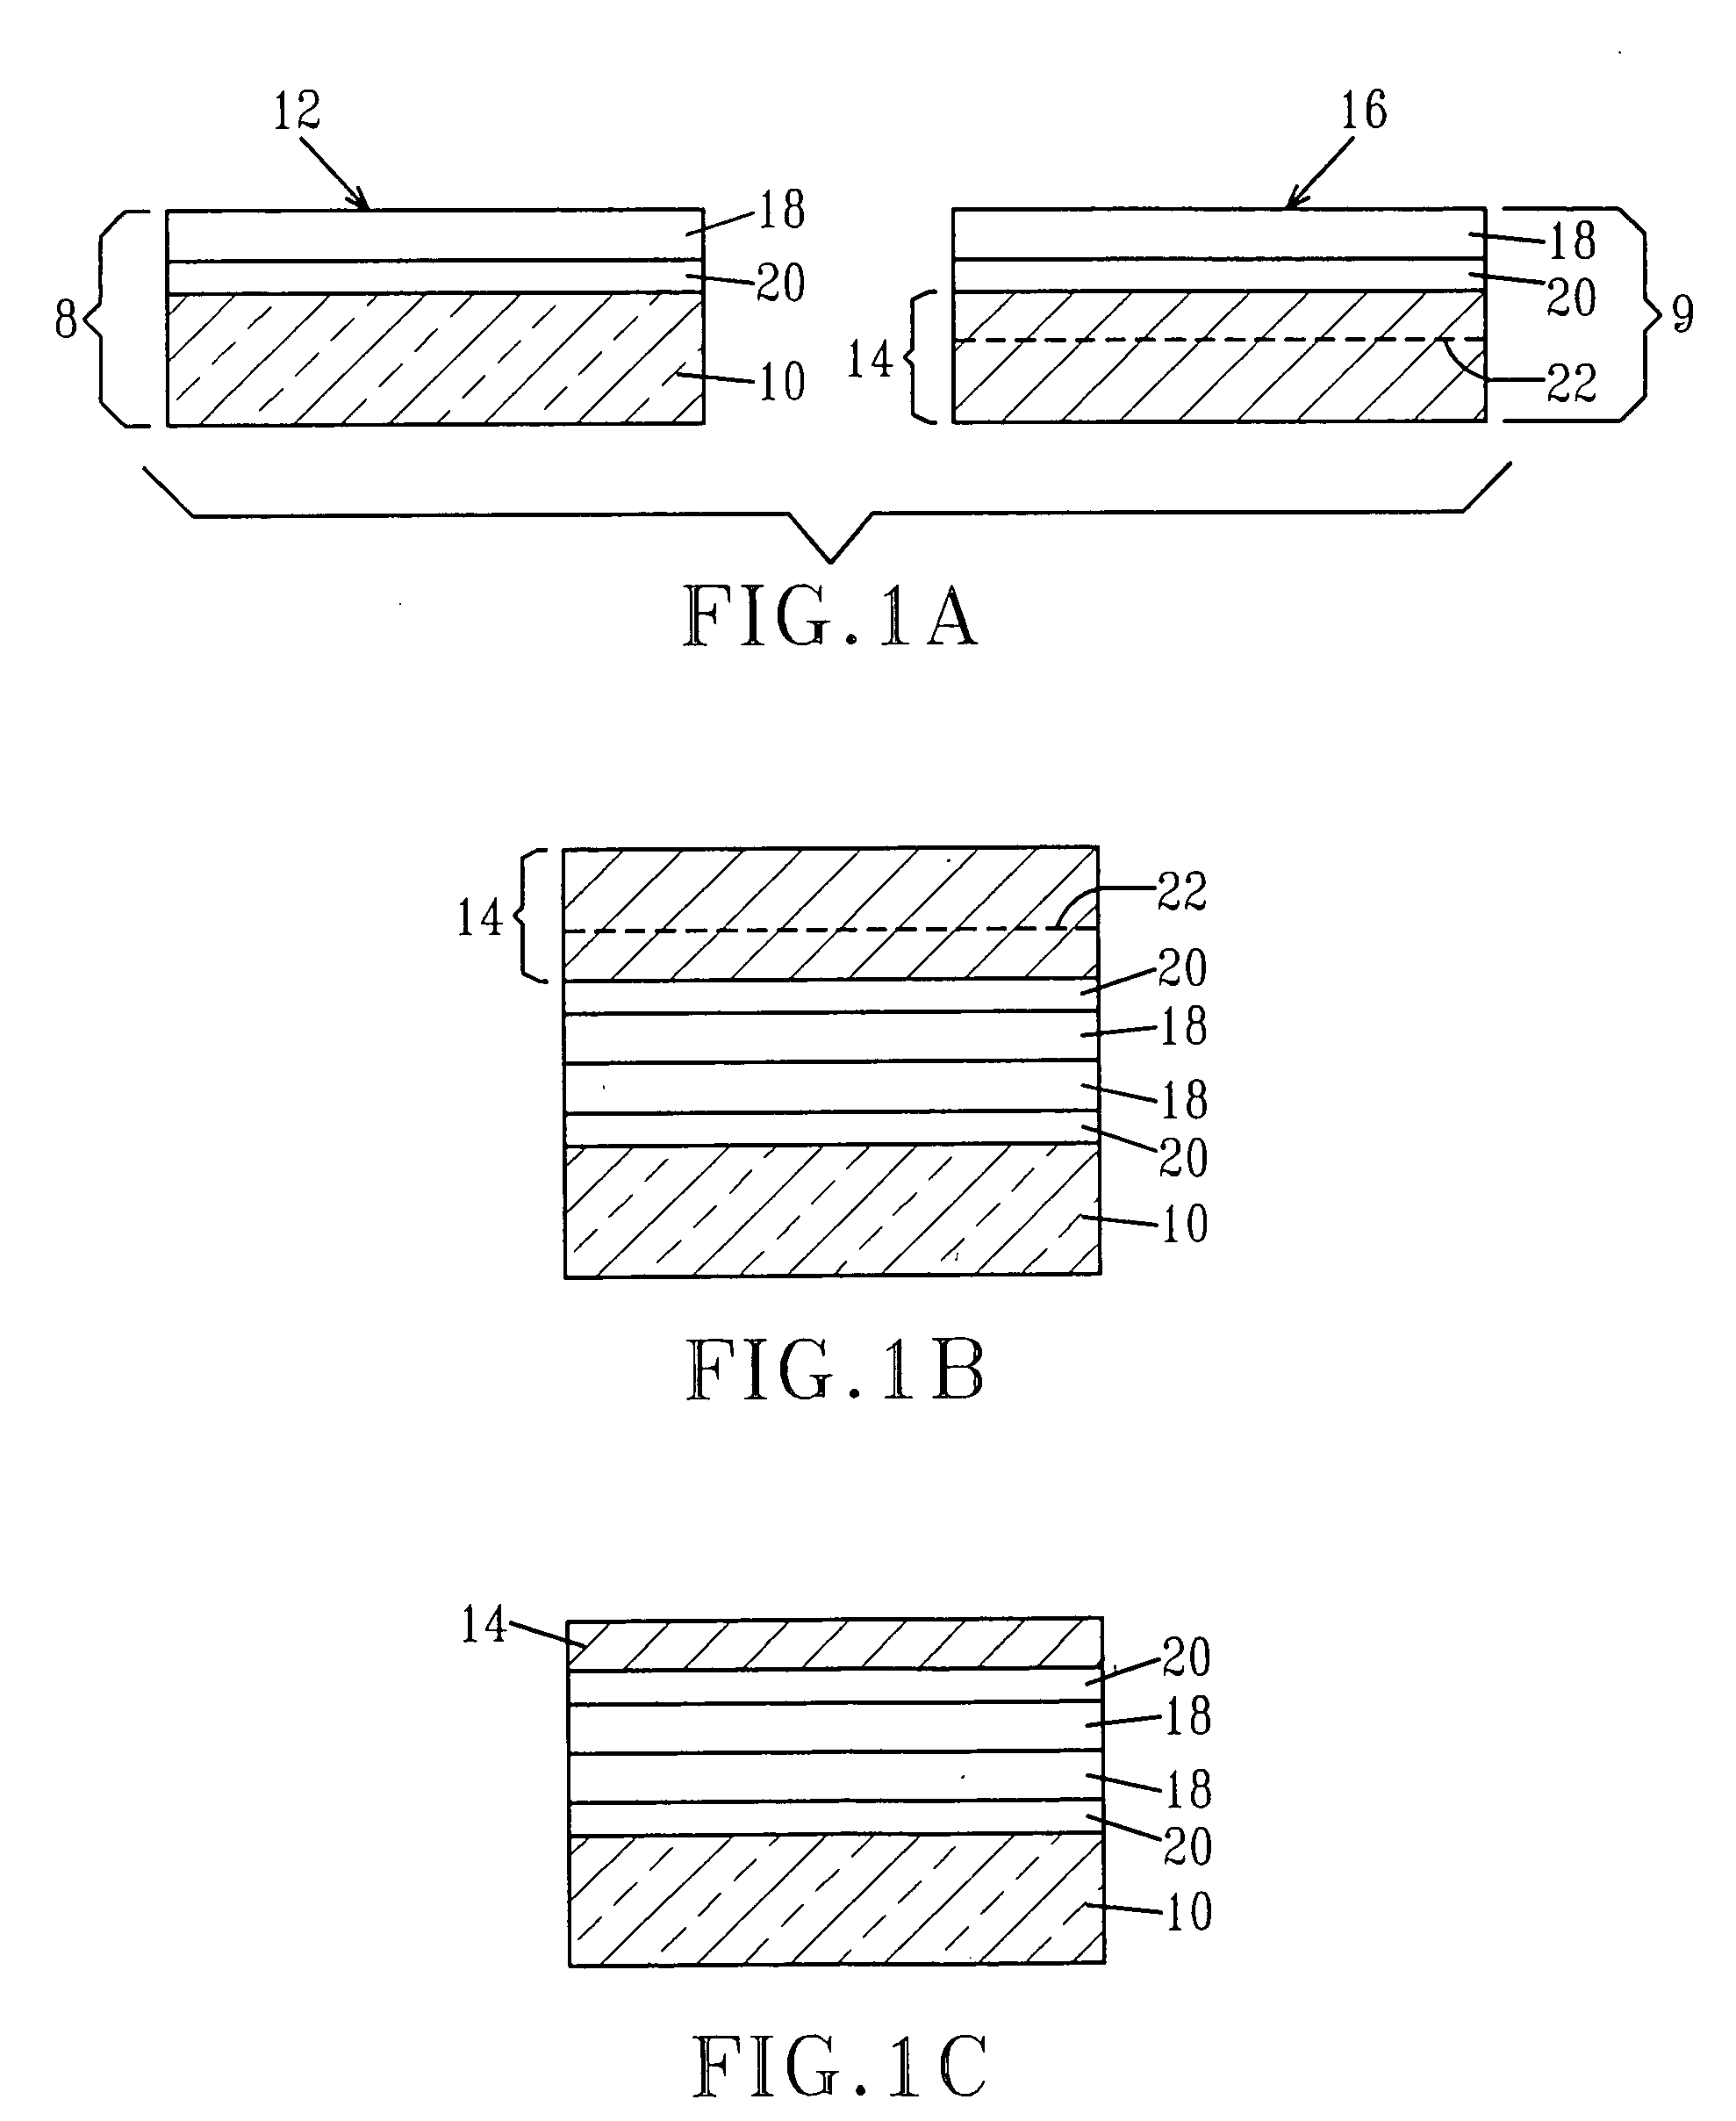 Semiconductor-dielectric-semiconductor device structure fabricated by wafer bonding